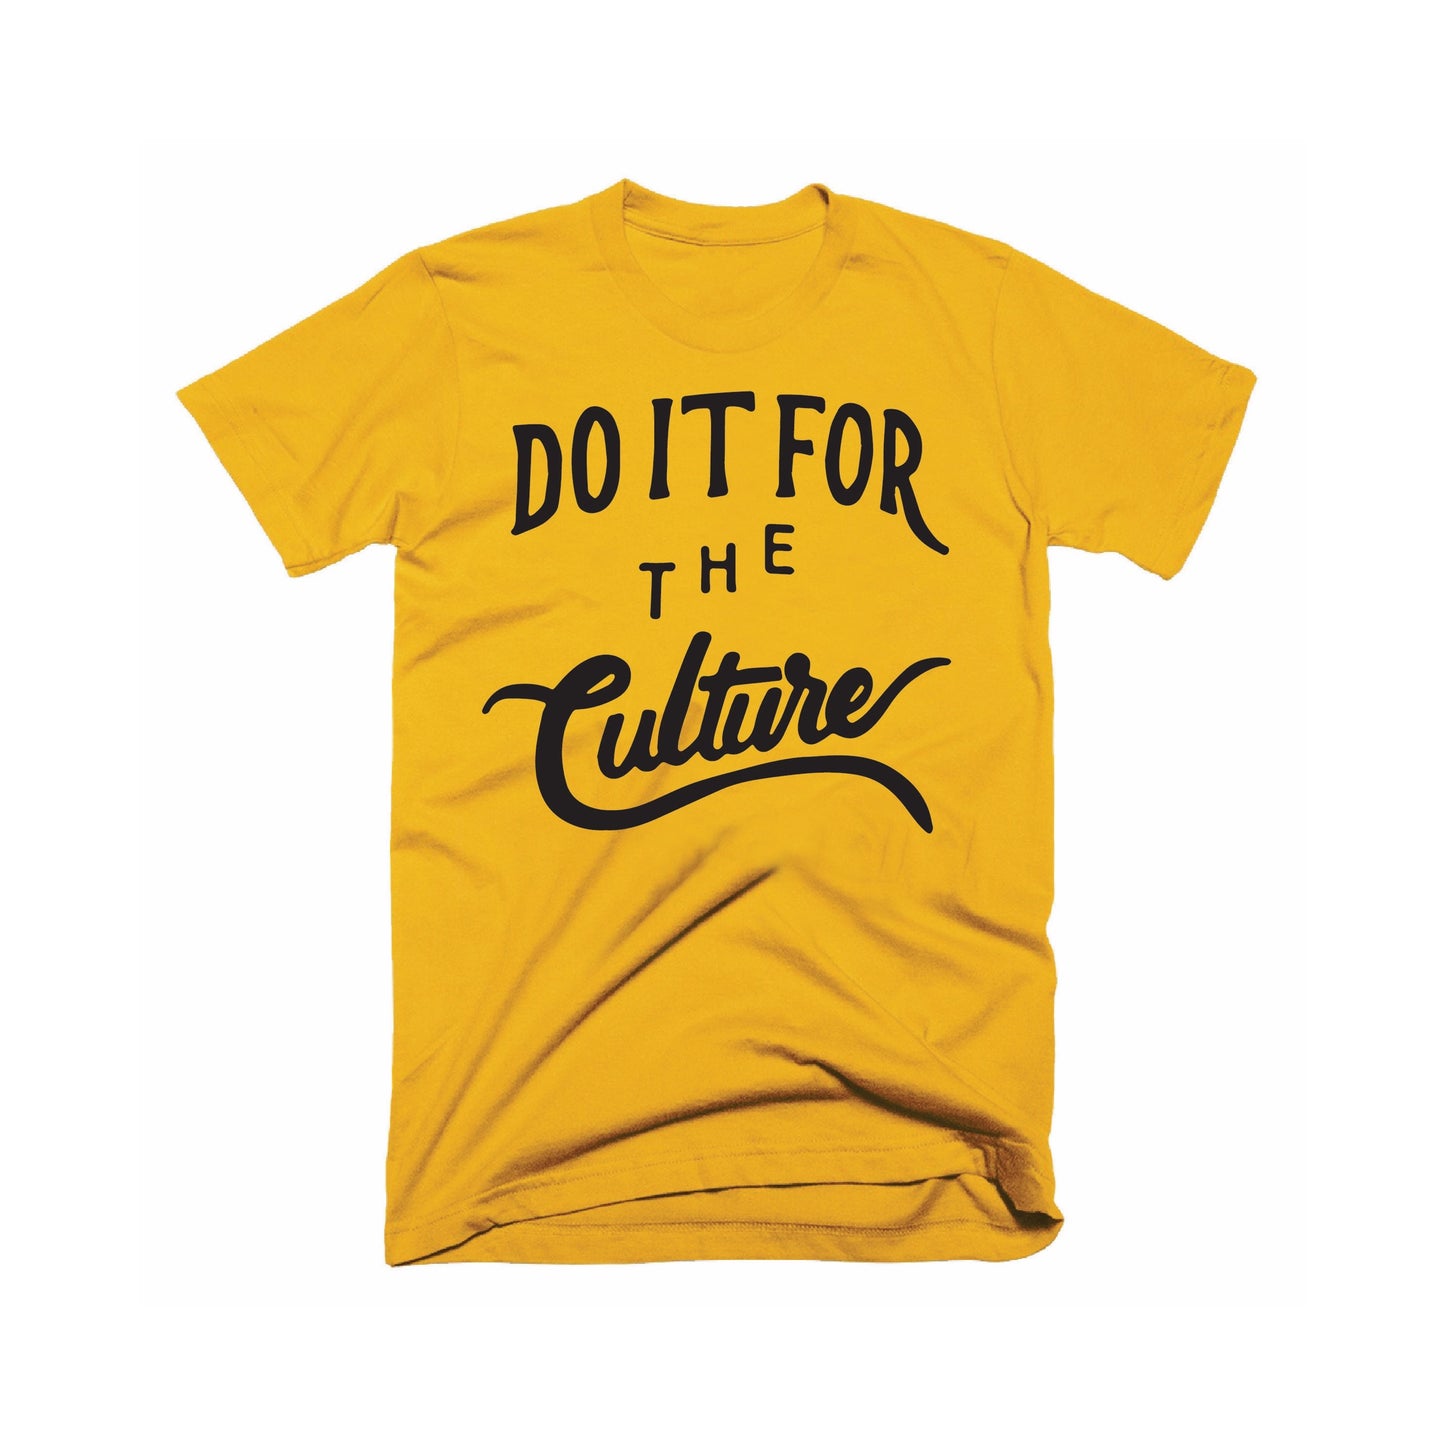 DO IT FOR THE CULTURE-UNISEX FIT